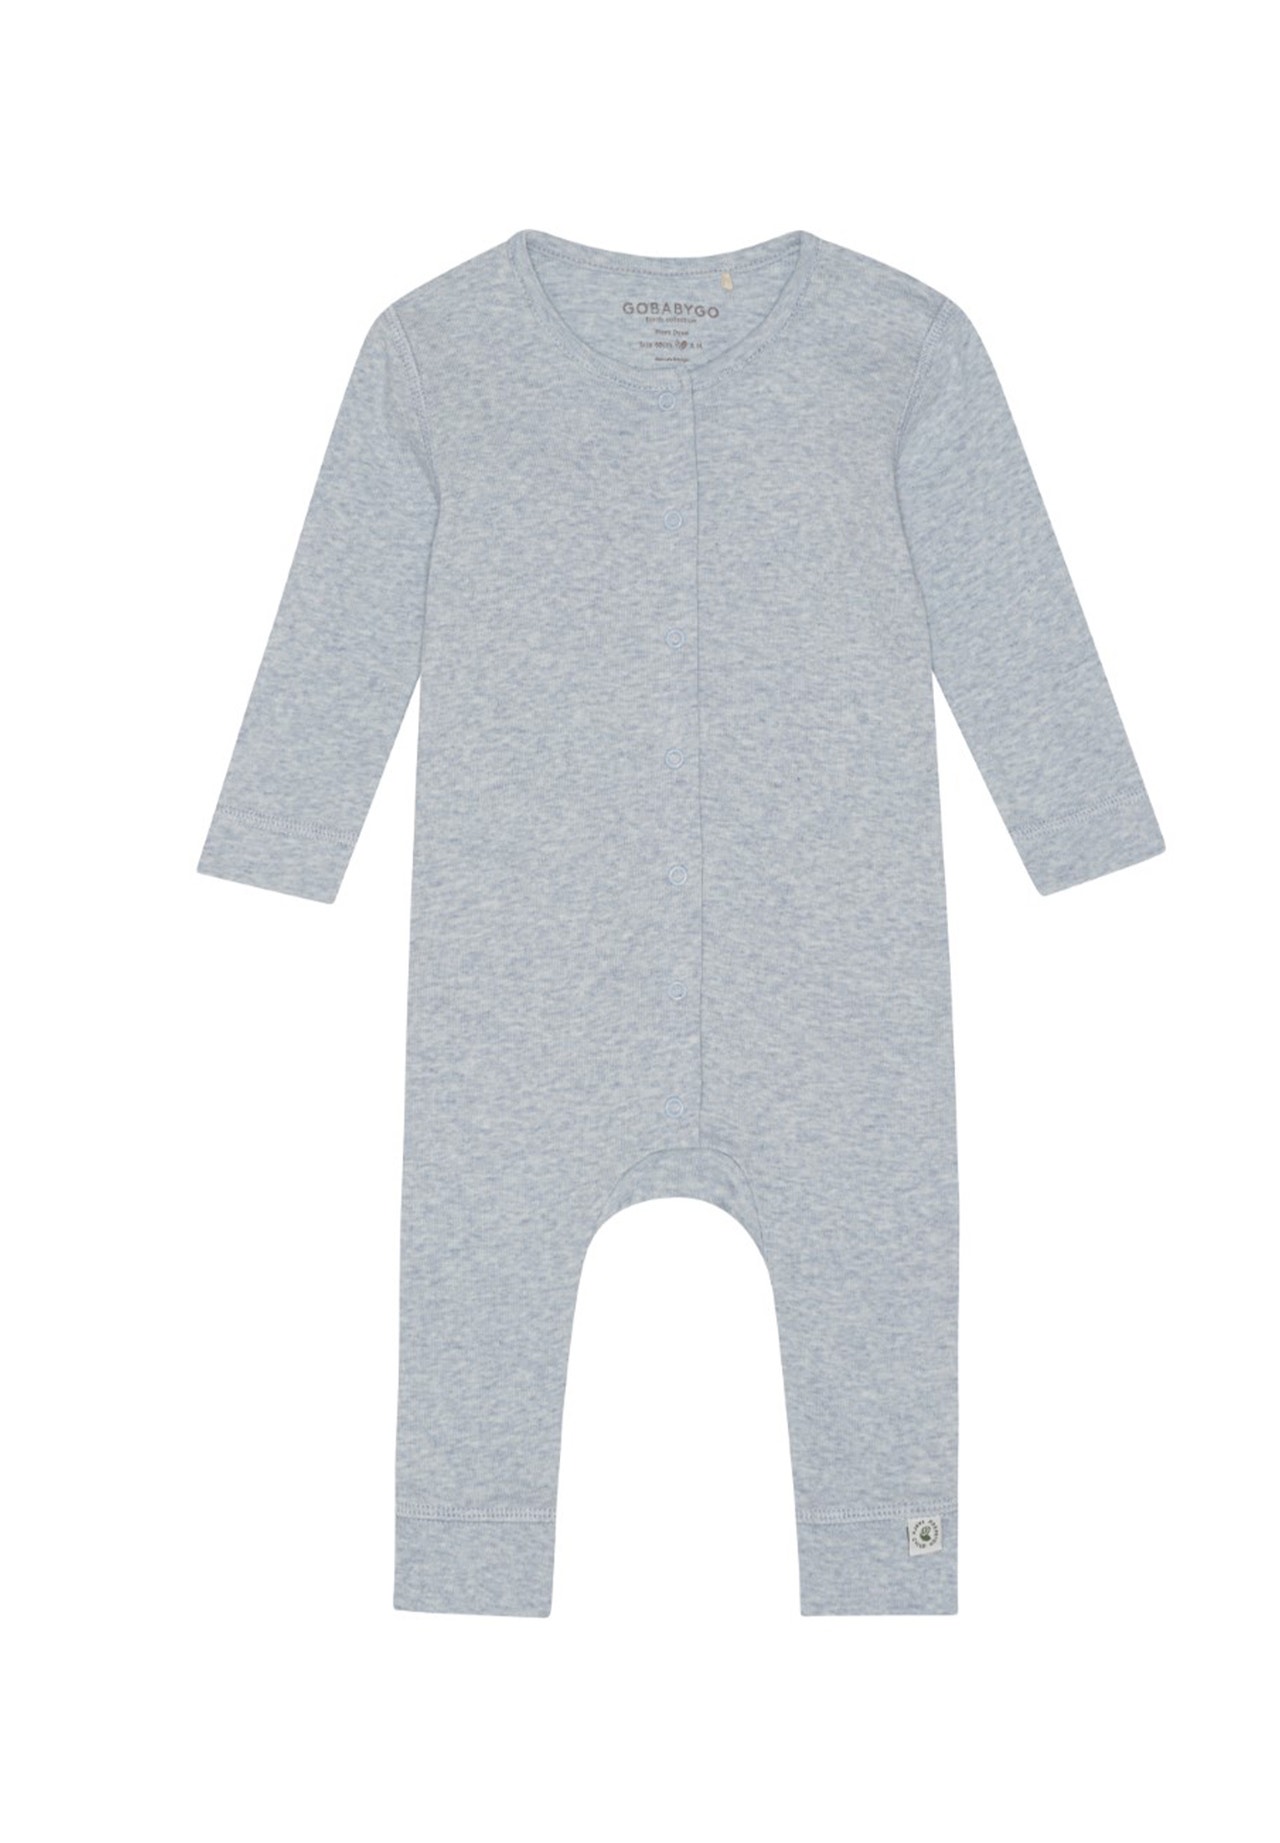 MAMA.LICIOUS Baby one-piece suit -Sea - 33333323